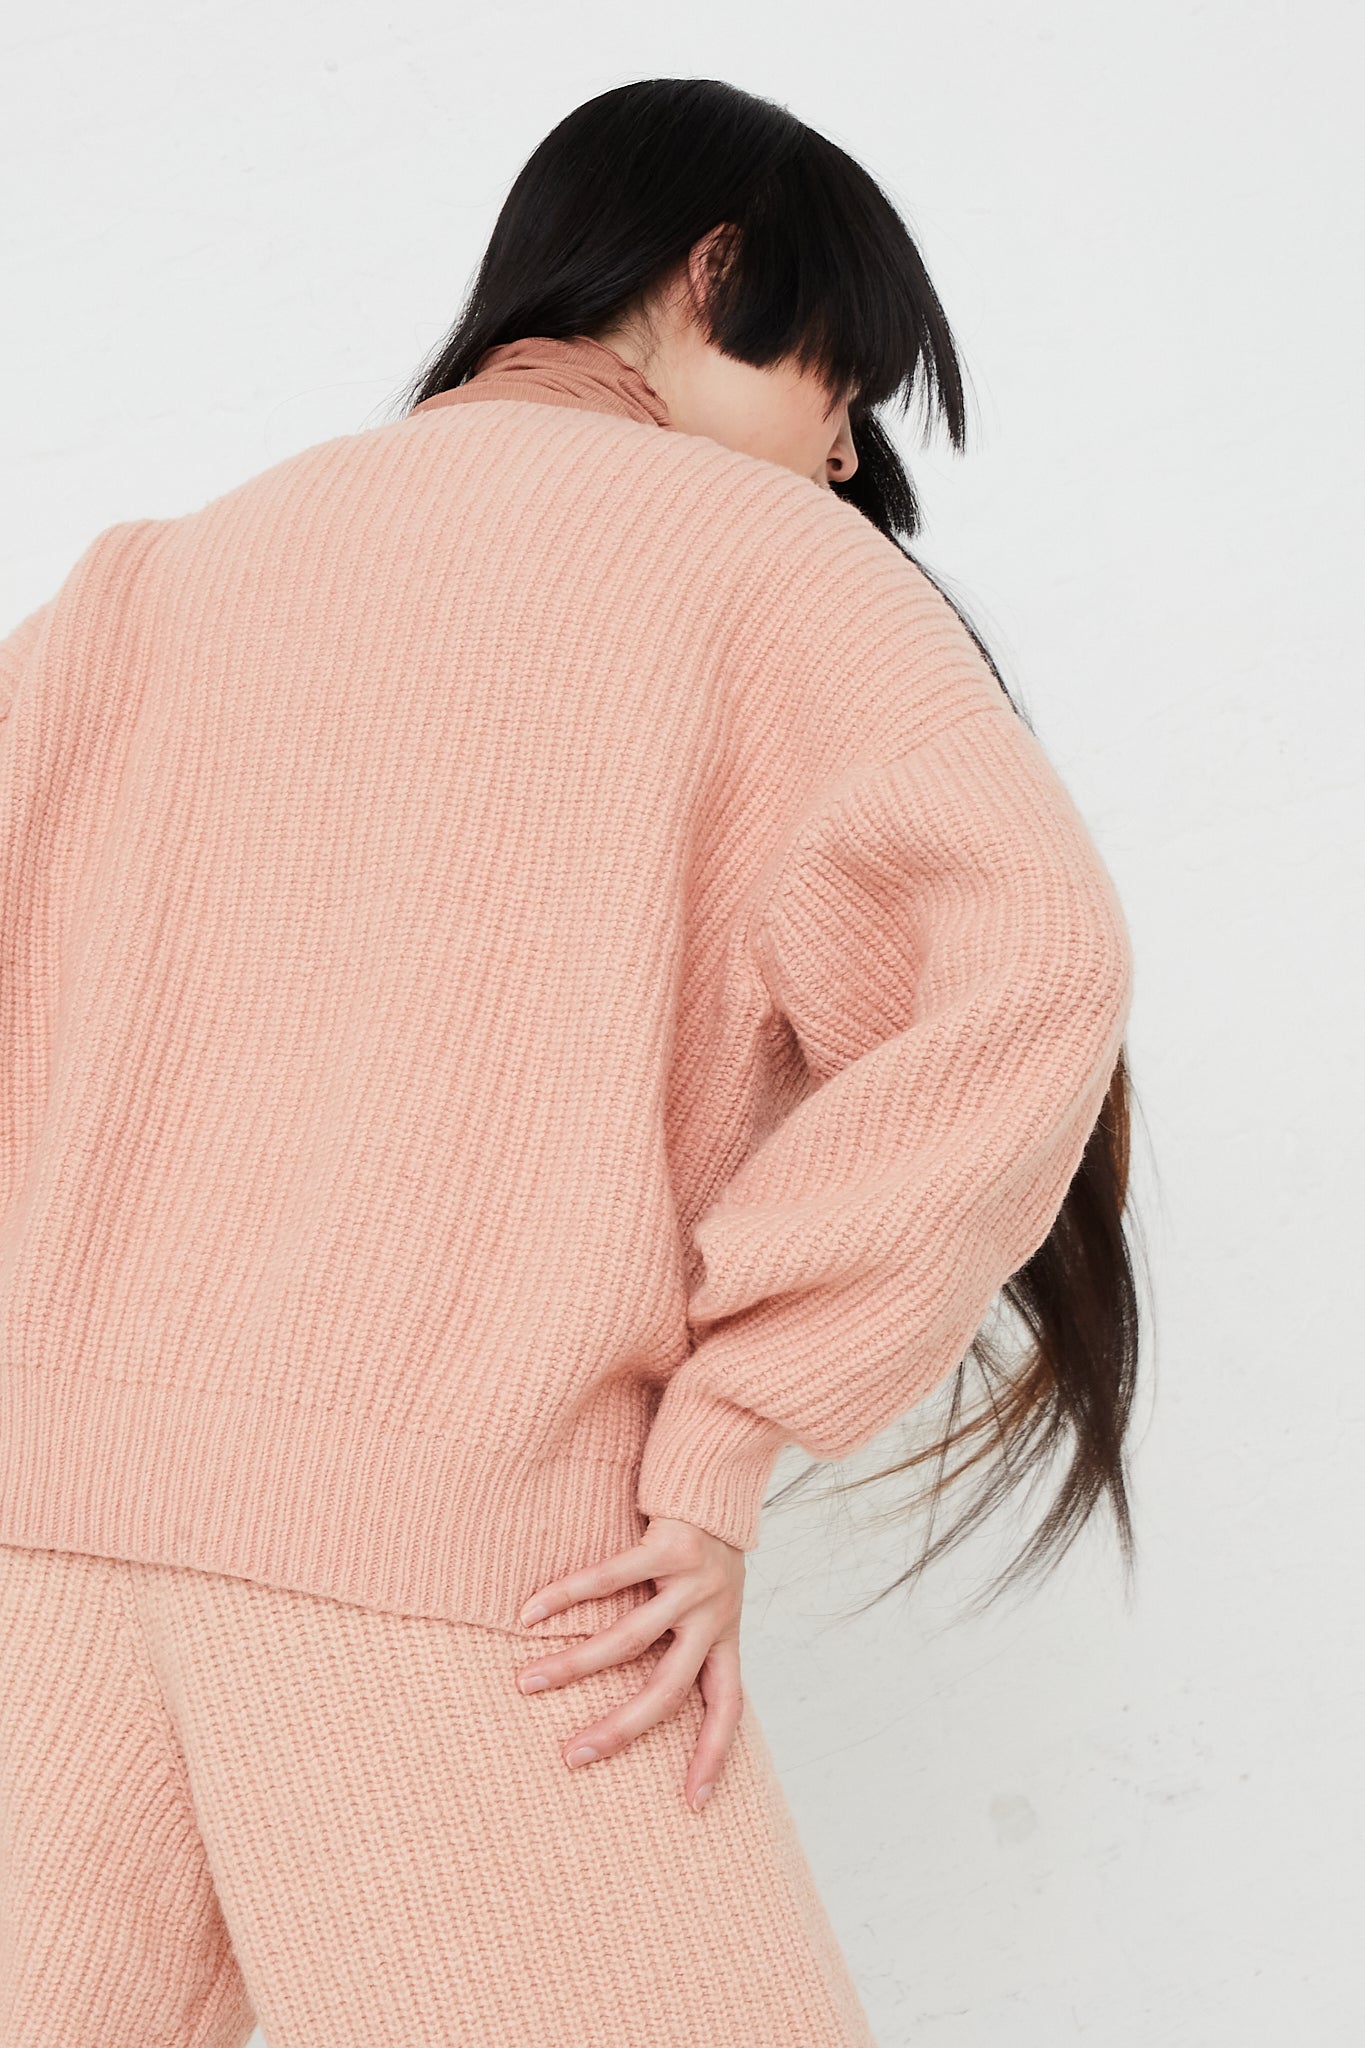 Mea Crew Neck Pullover Sweater in Pink by Baserange for Oroboro Back